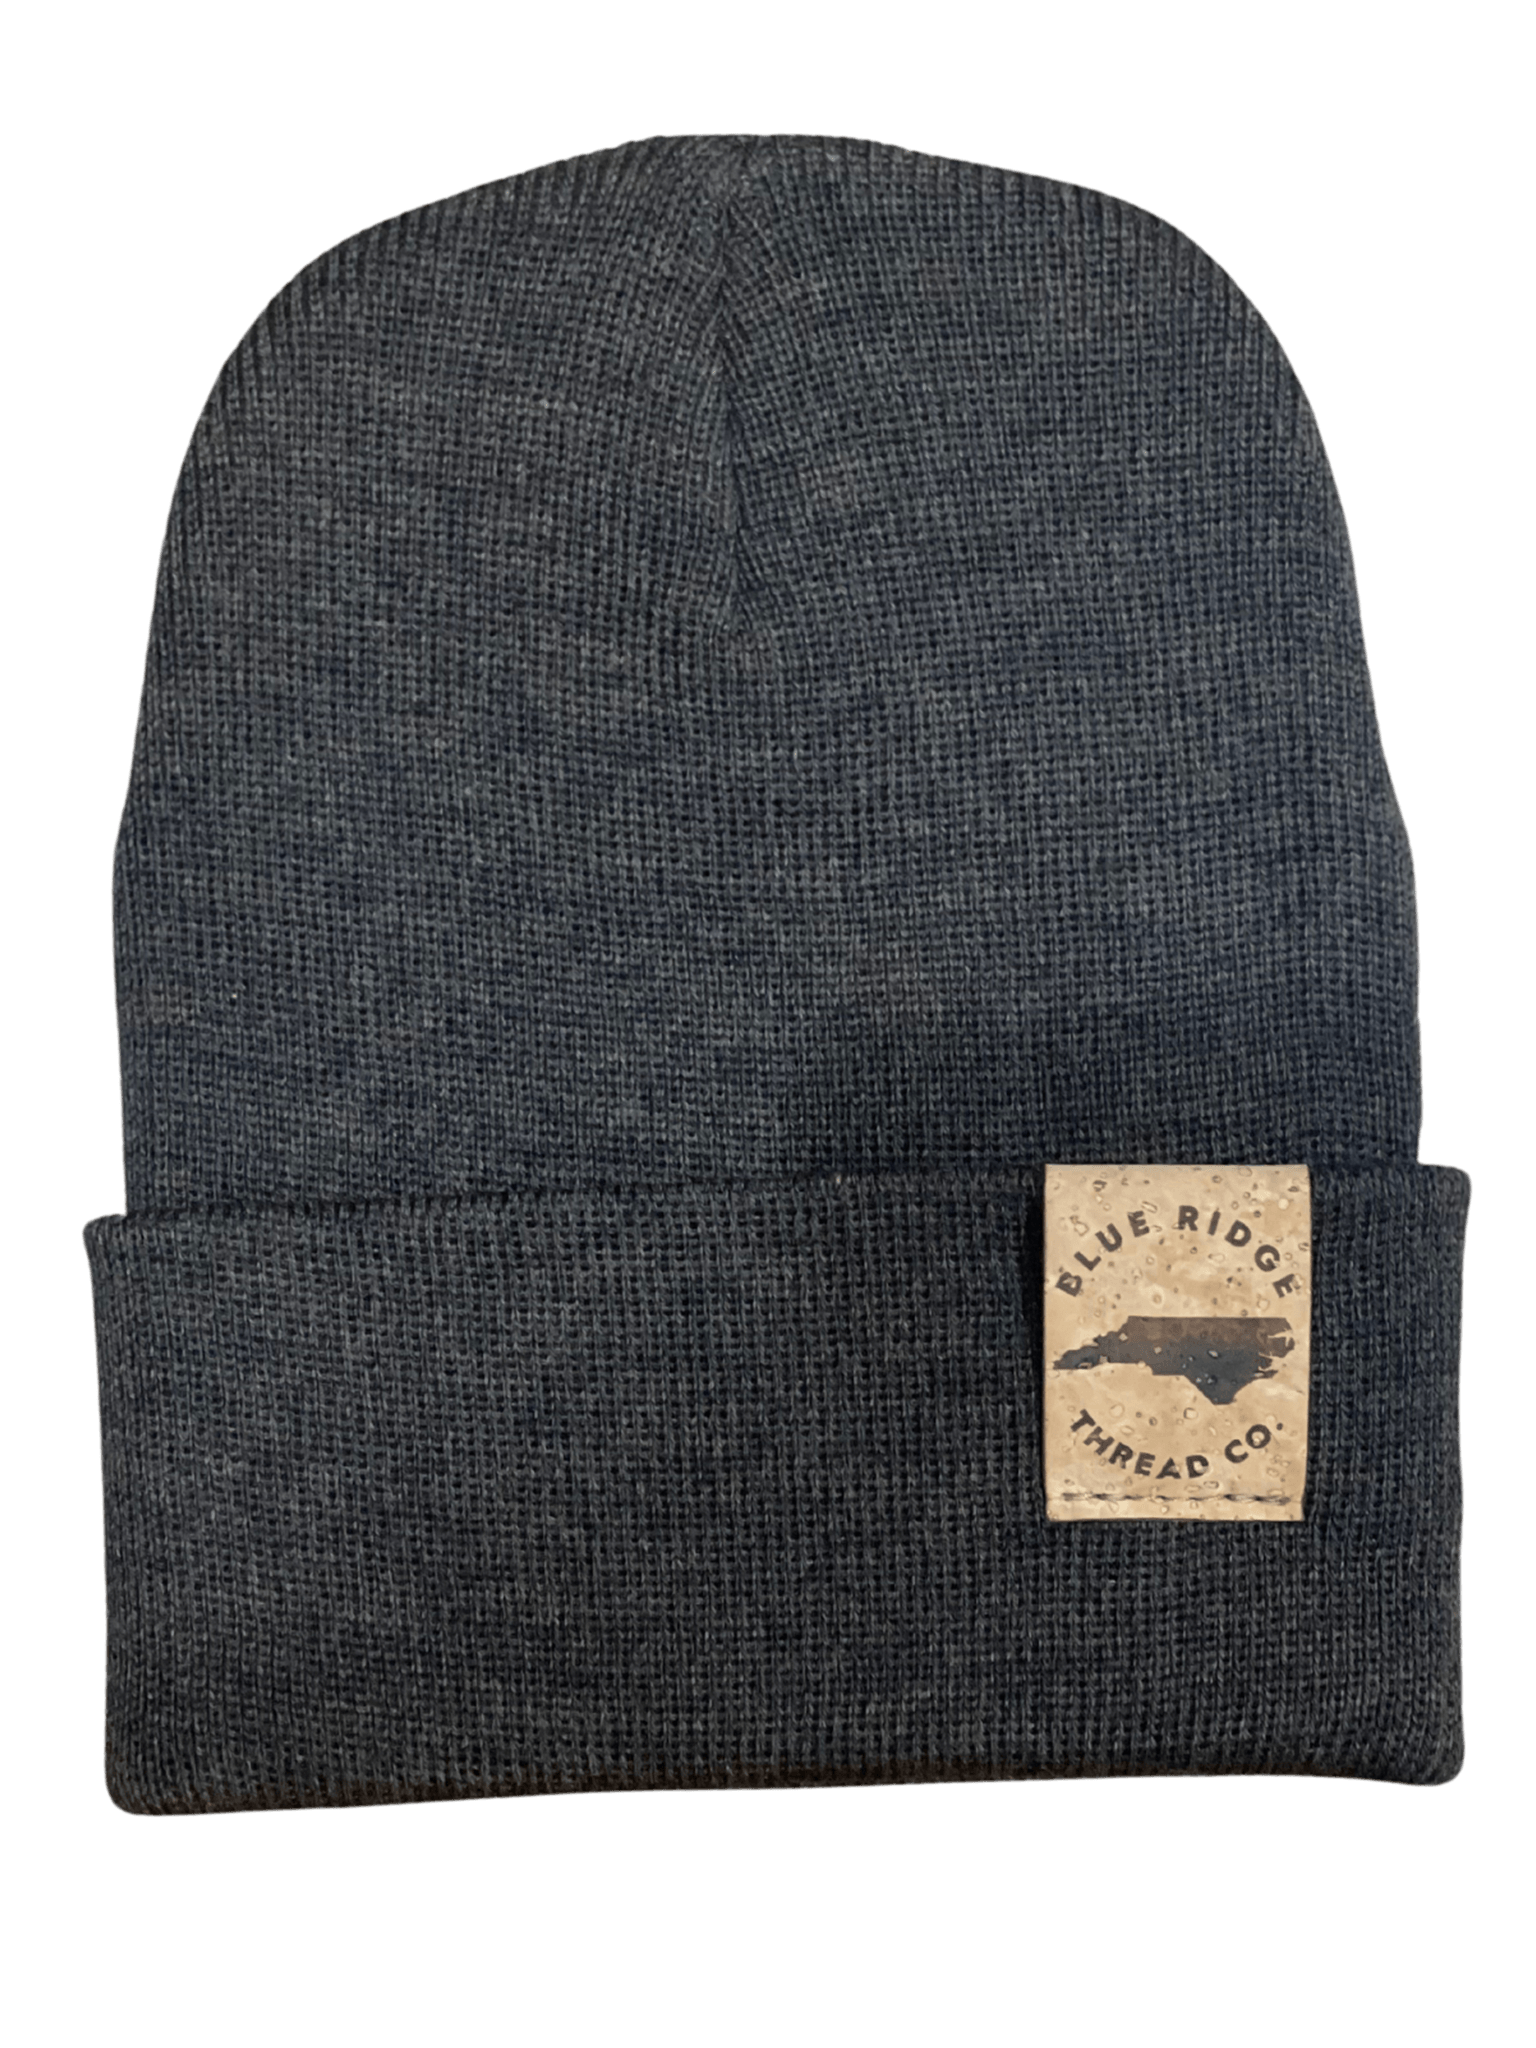 Eco friendly 100% merino wool watchcap beanie with elk cork leather tag in charcoal